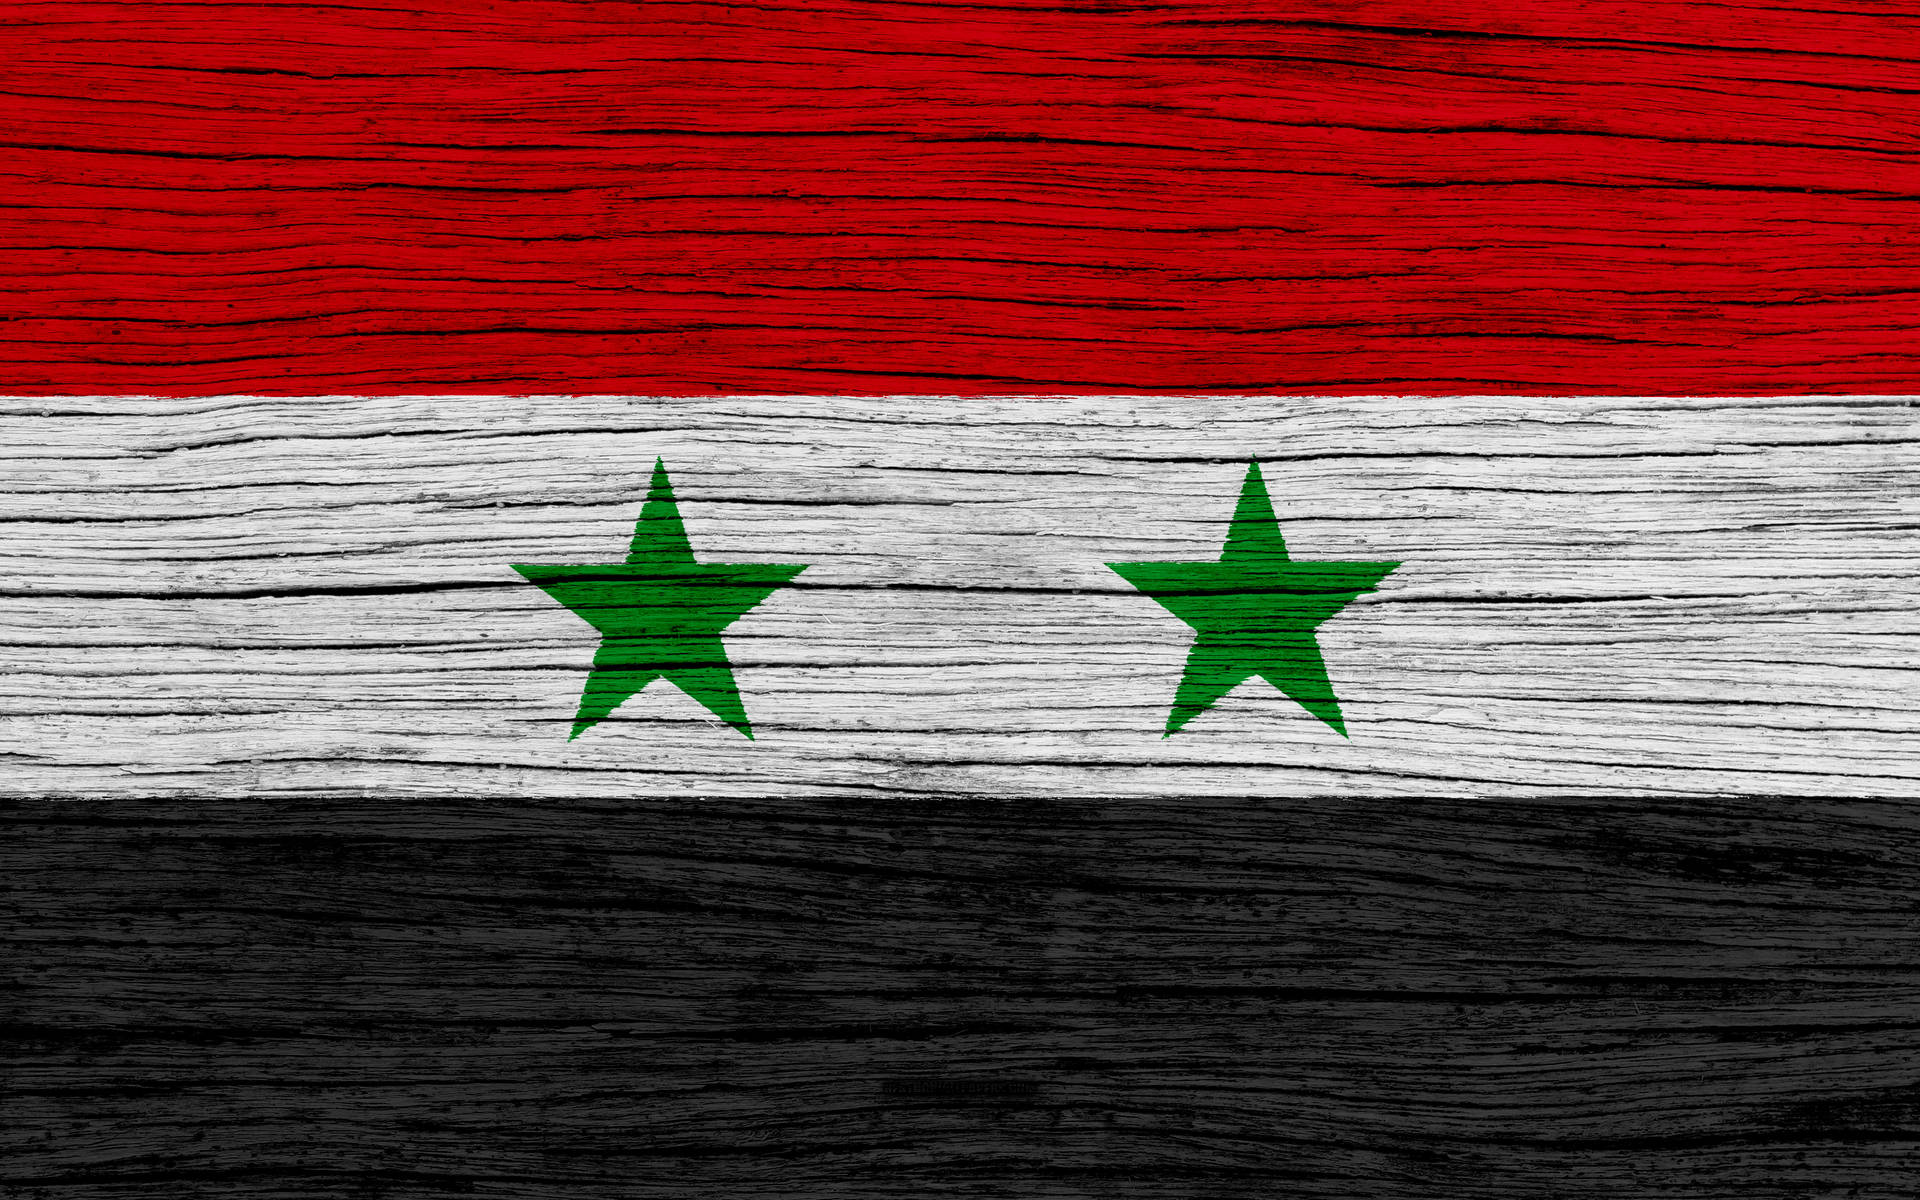 National Flag Of Syria Wallpaper